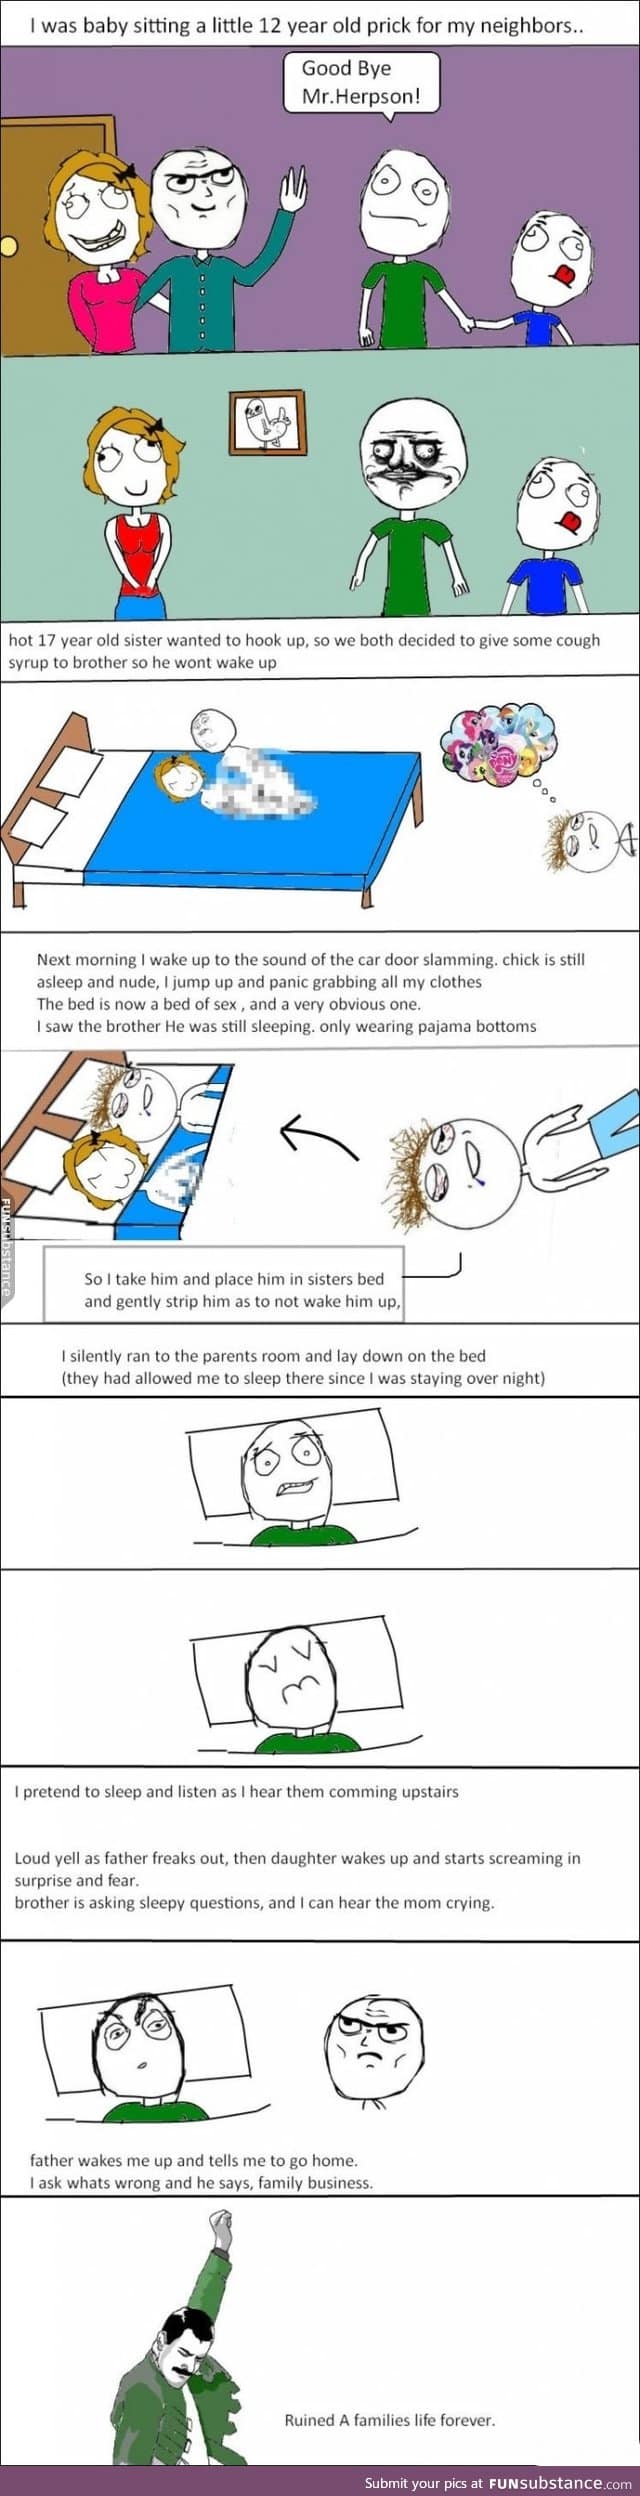 Favorite rage comic of all time